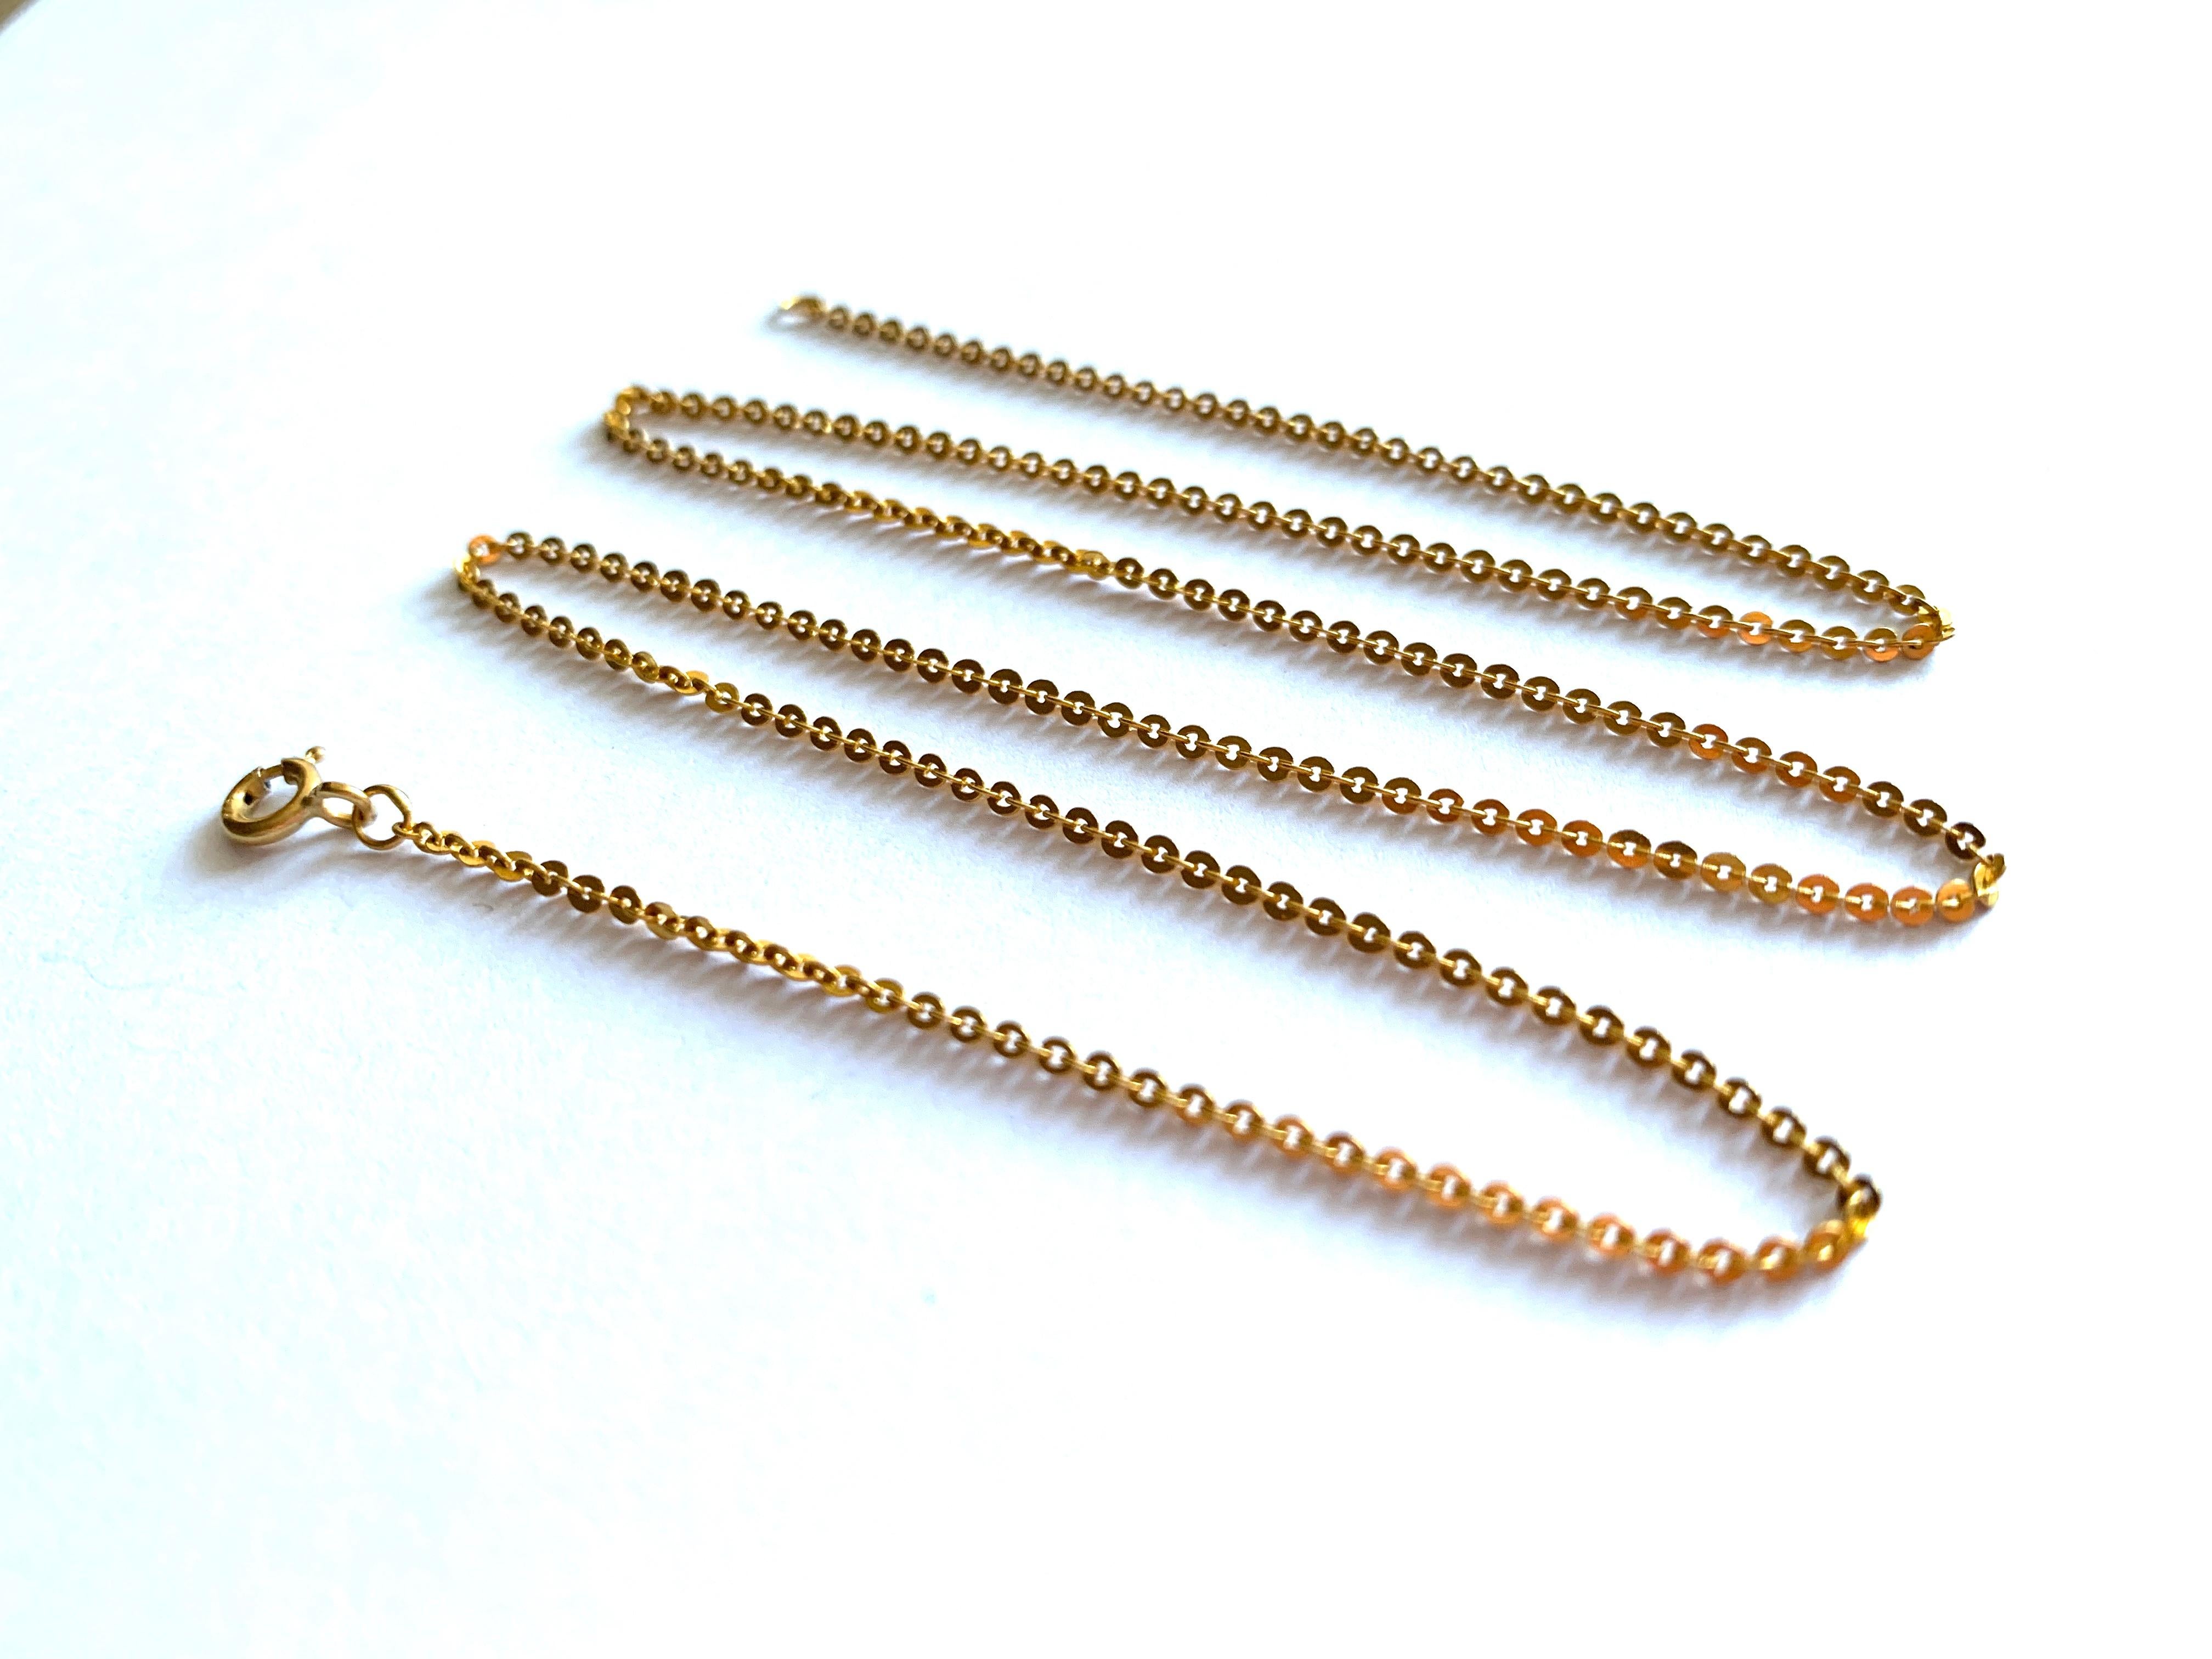 22ct 916 Gold Chain
Length 18.25